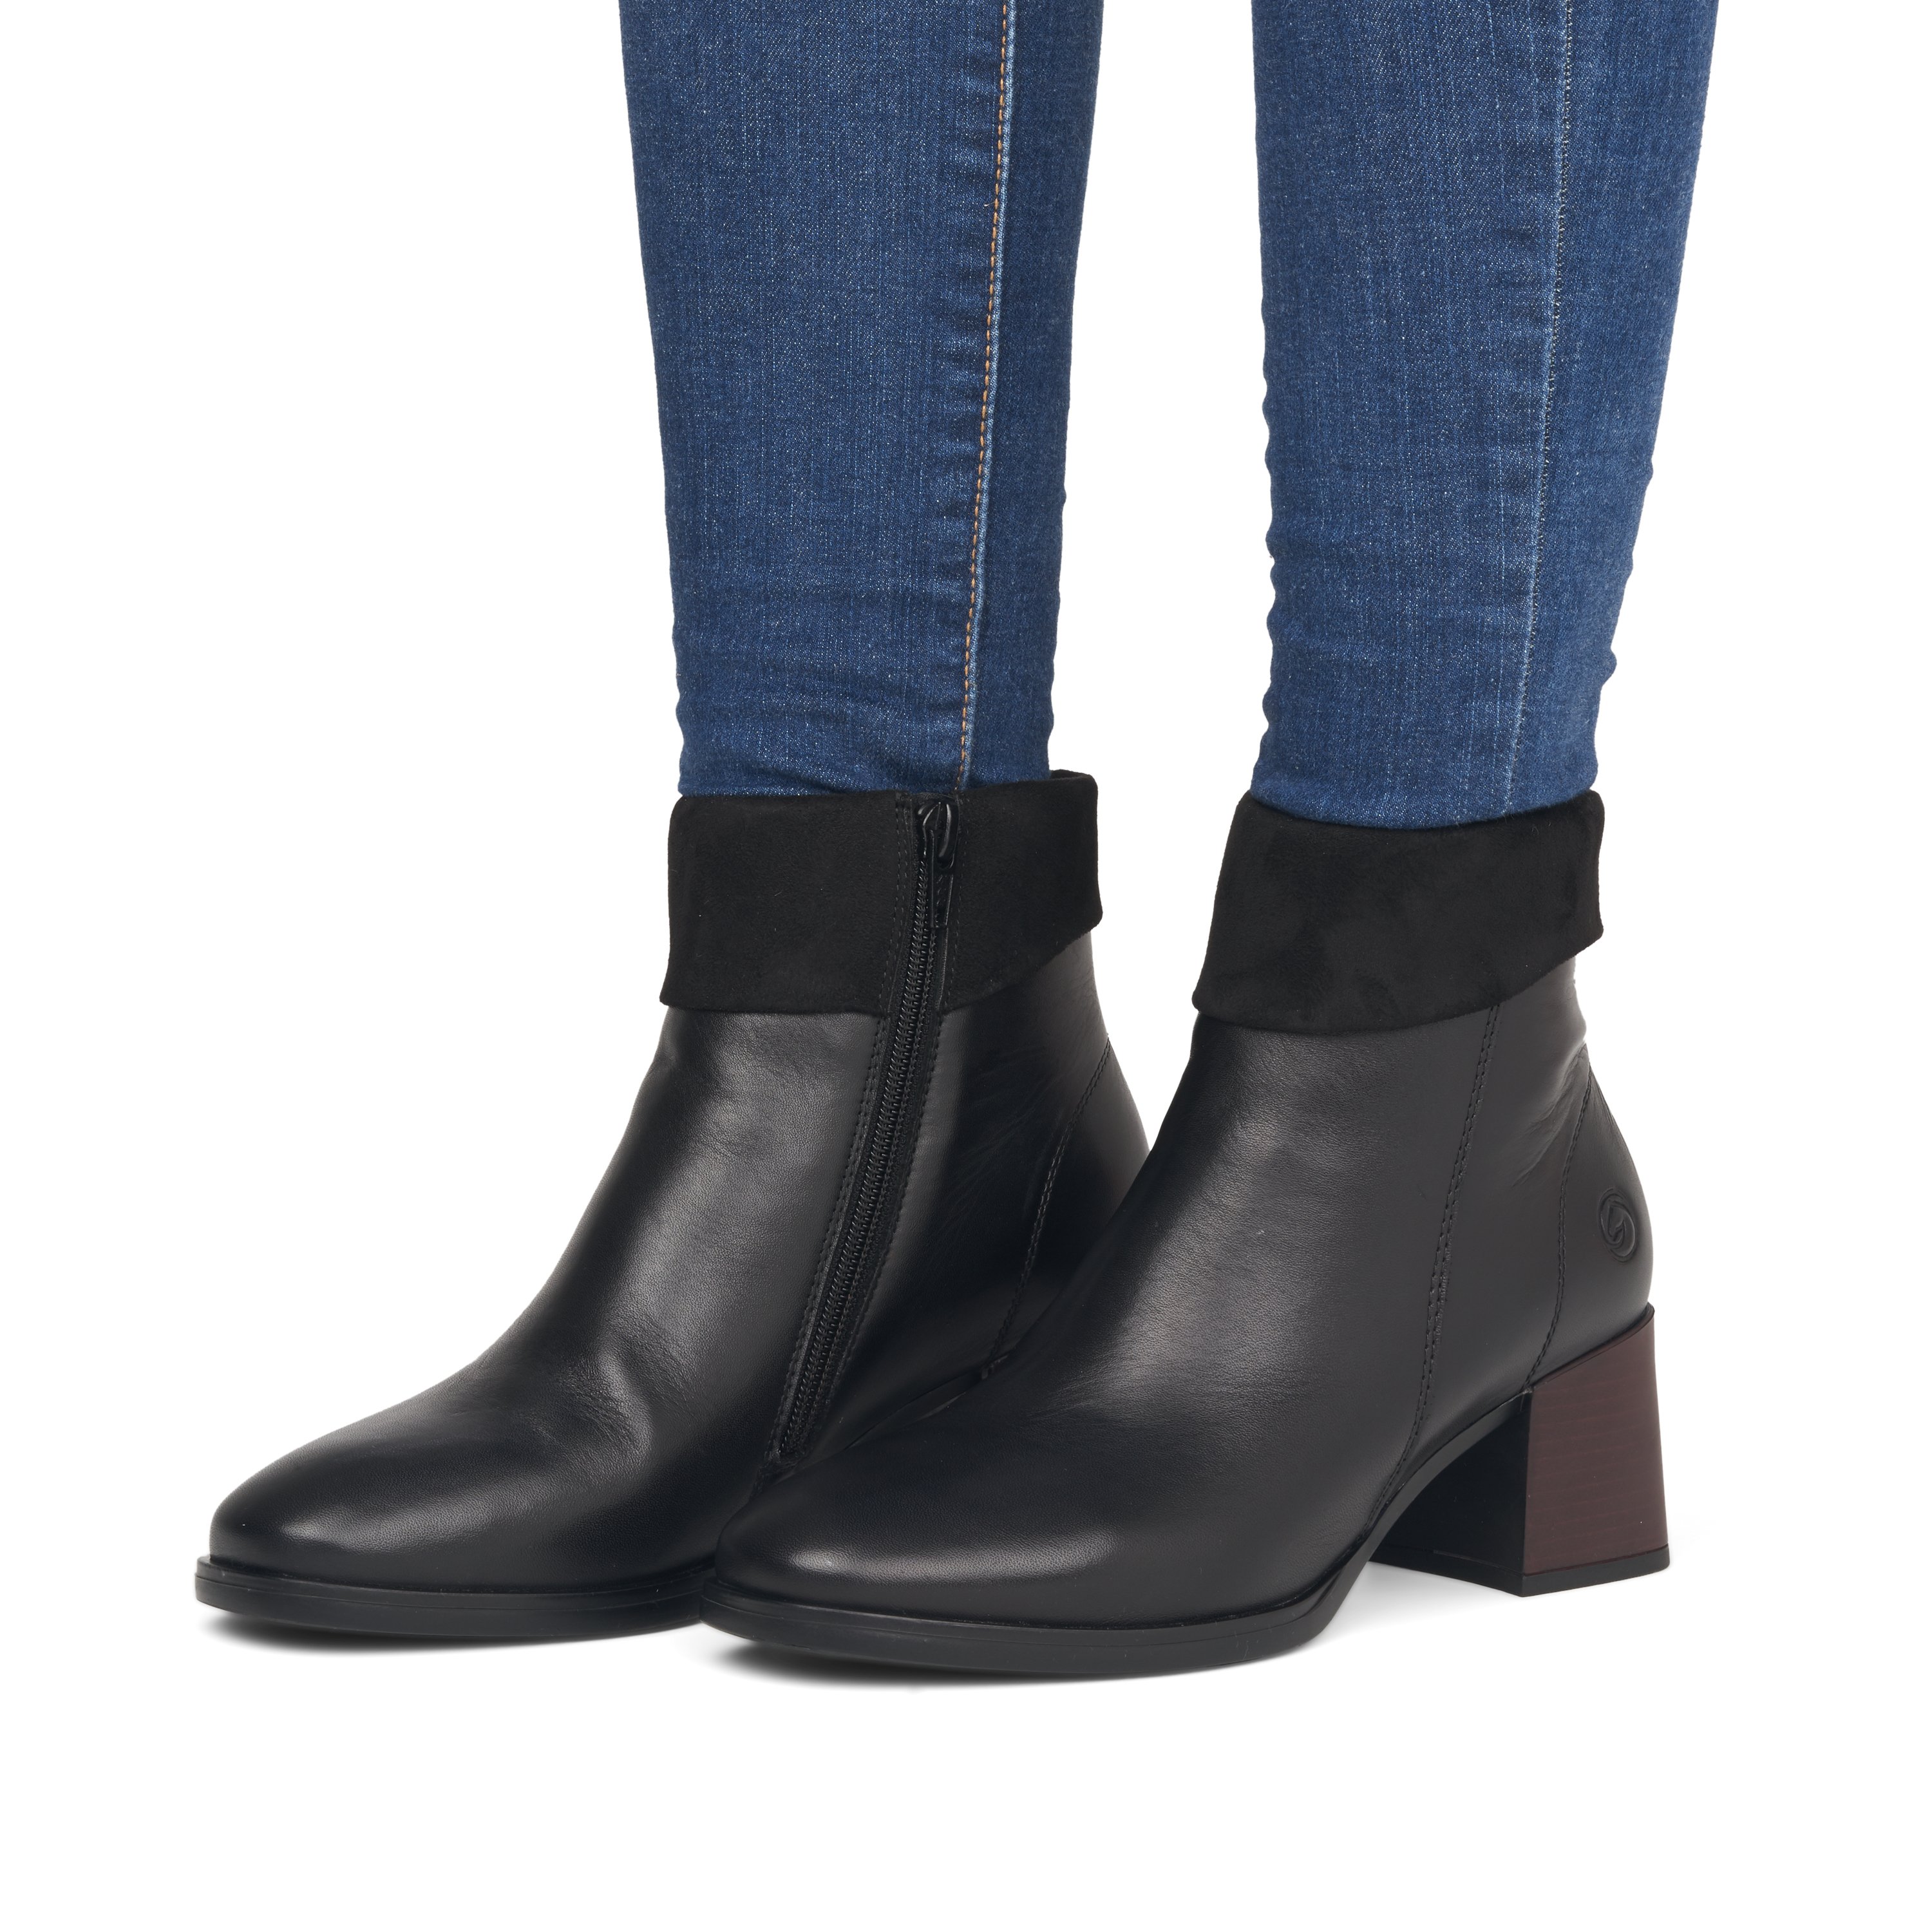 Asphalt black remonte women´s high boots D0B72-01 with cushioning profile sole. Shoe on foot